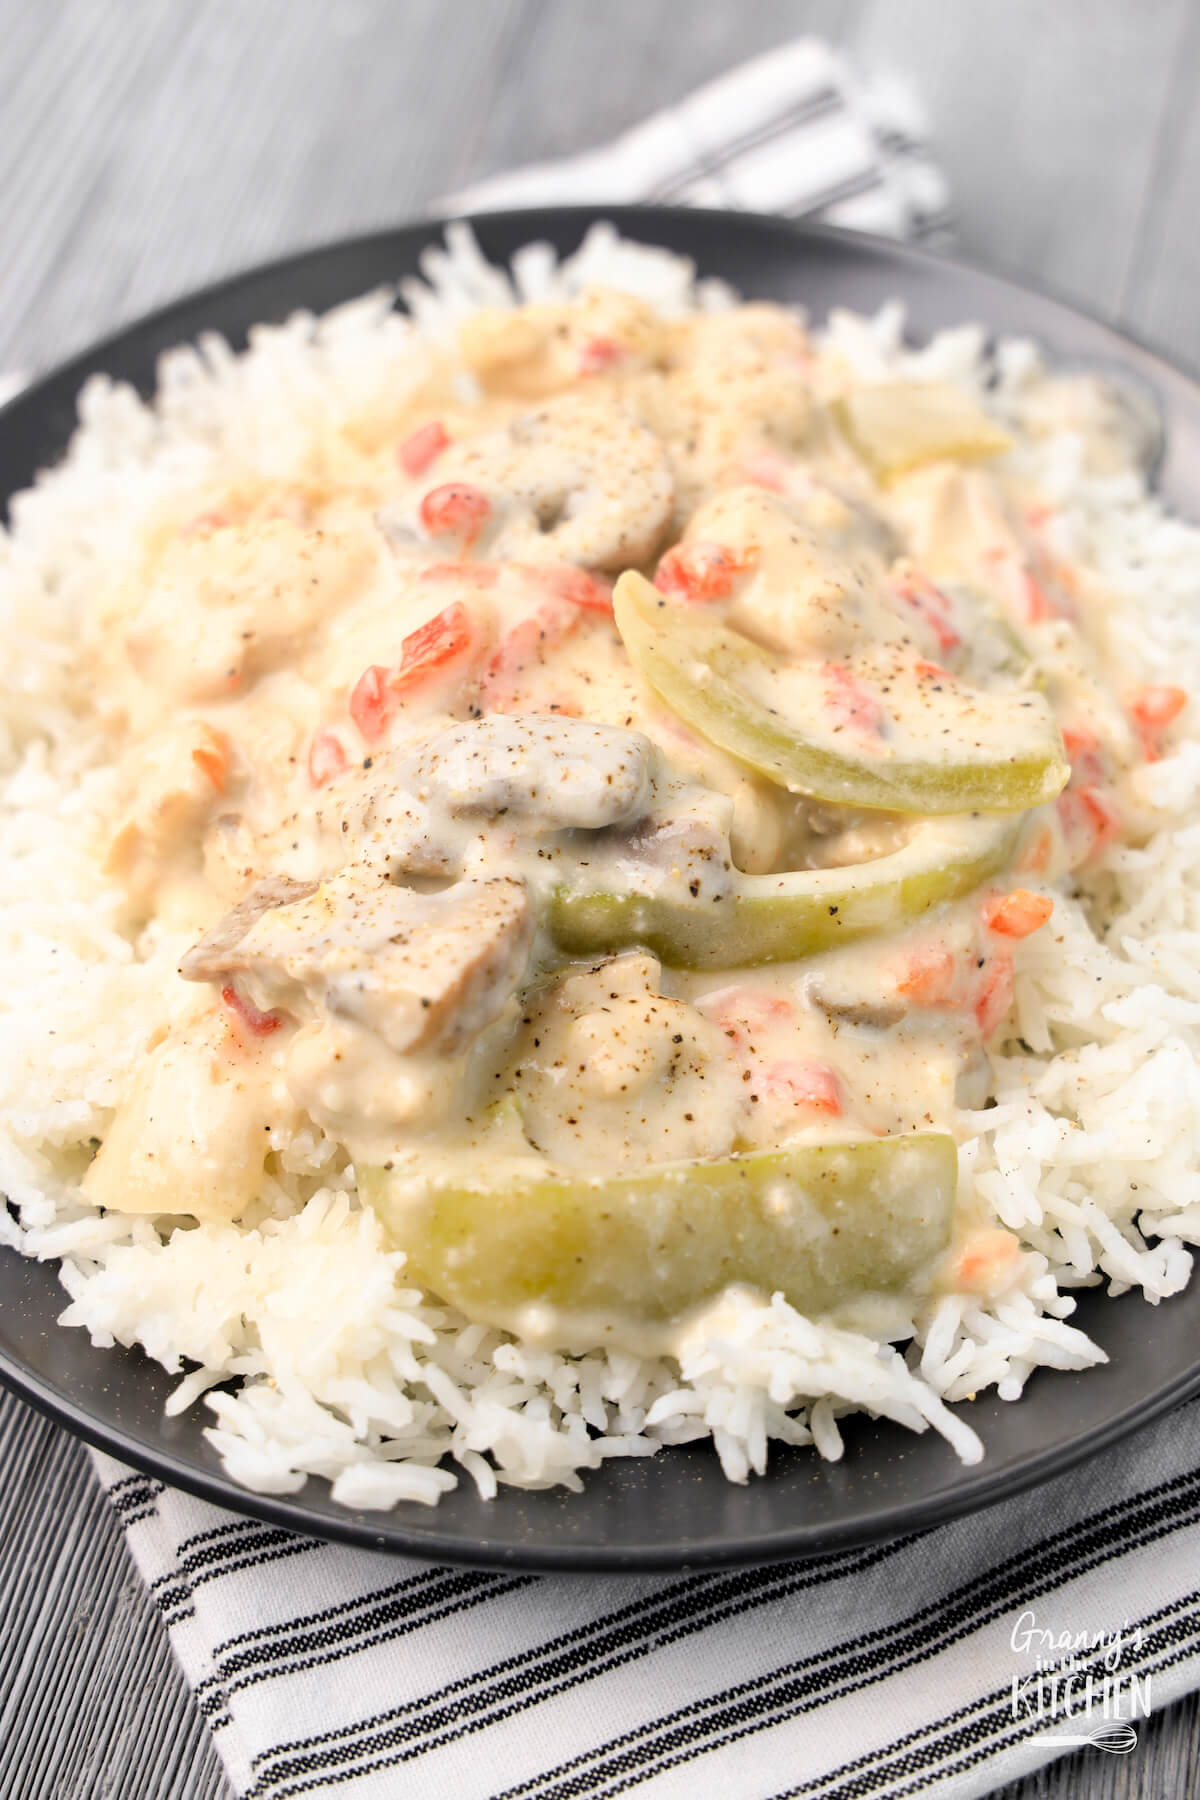 plated Chicken a la King dish with creamy sauce and vegetables over rice